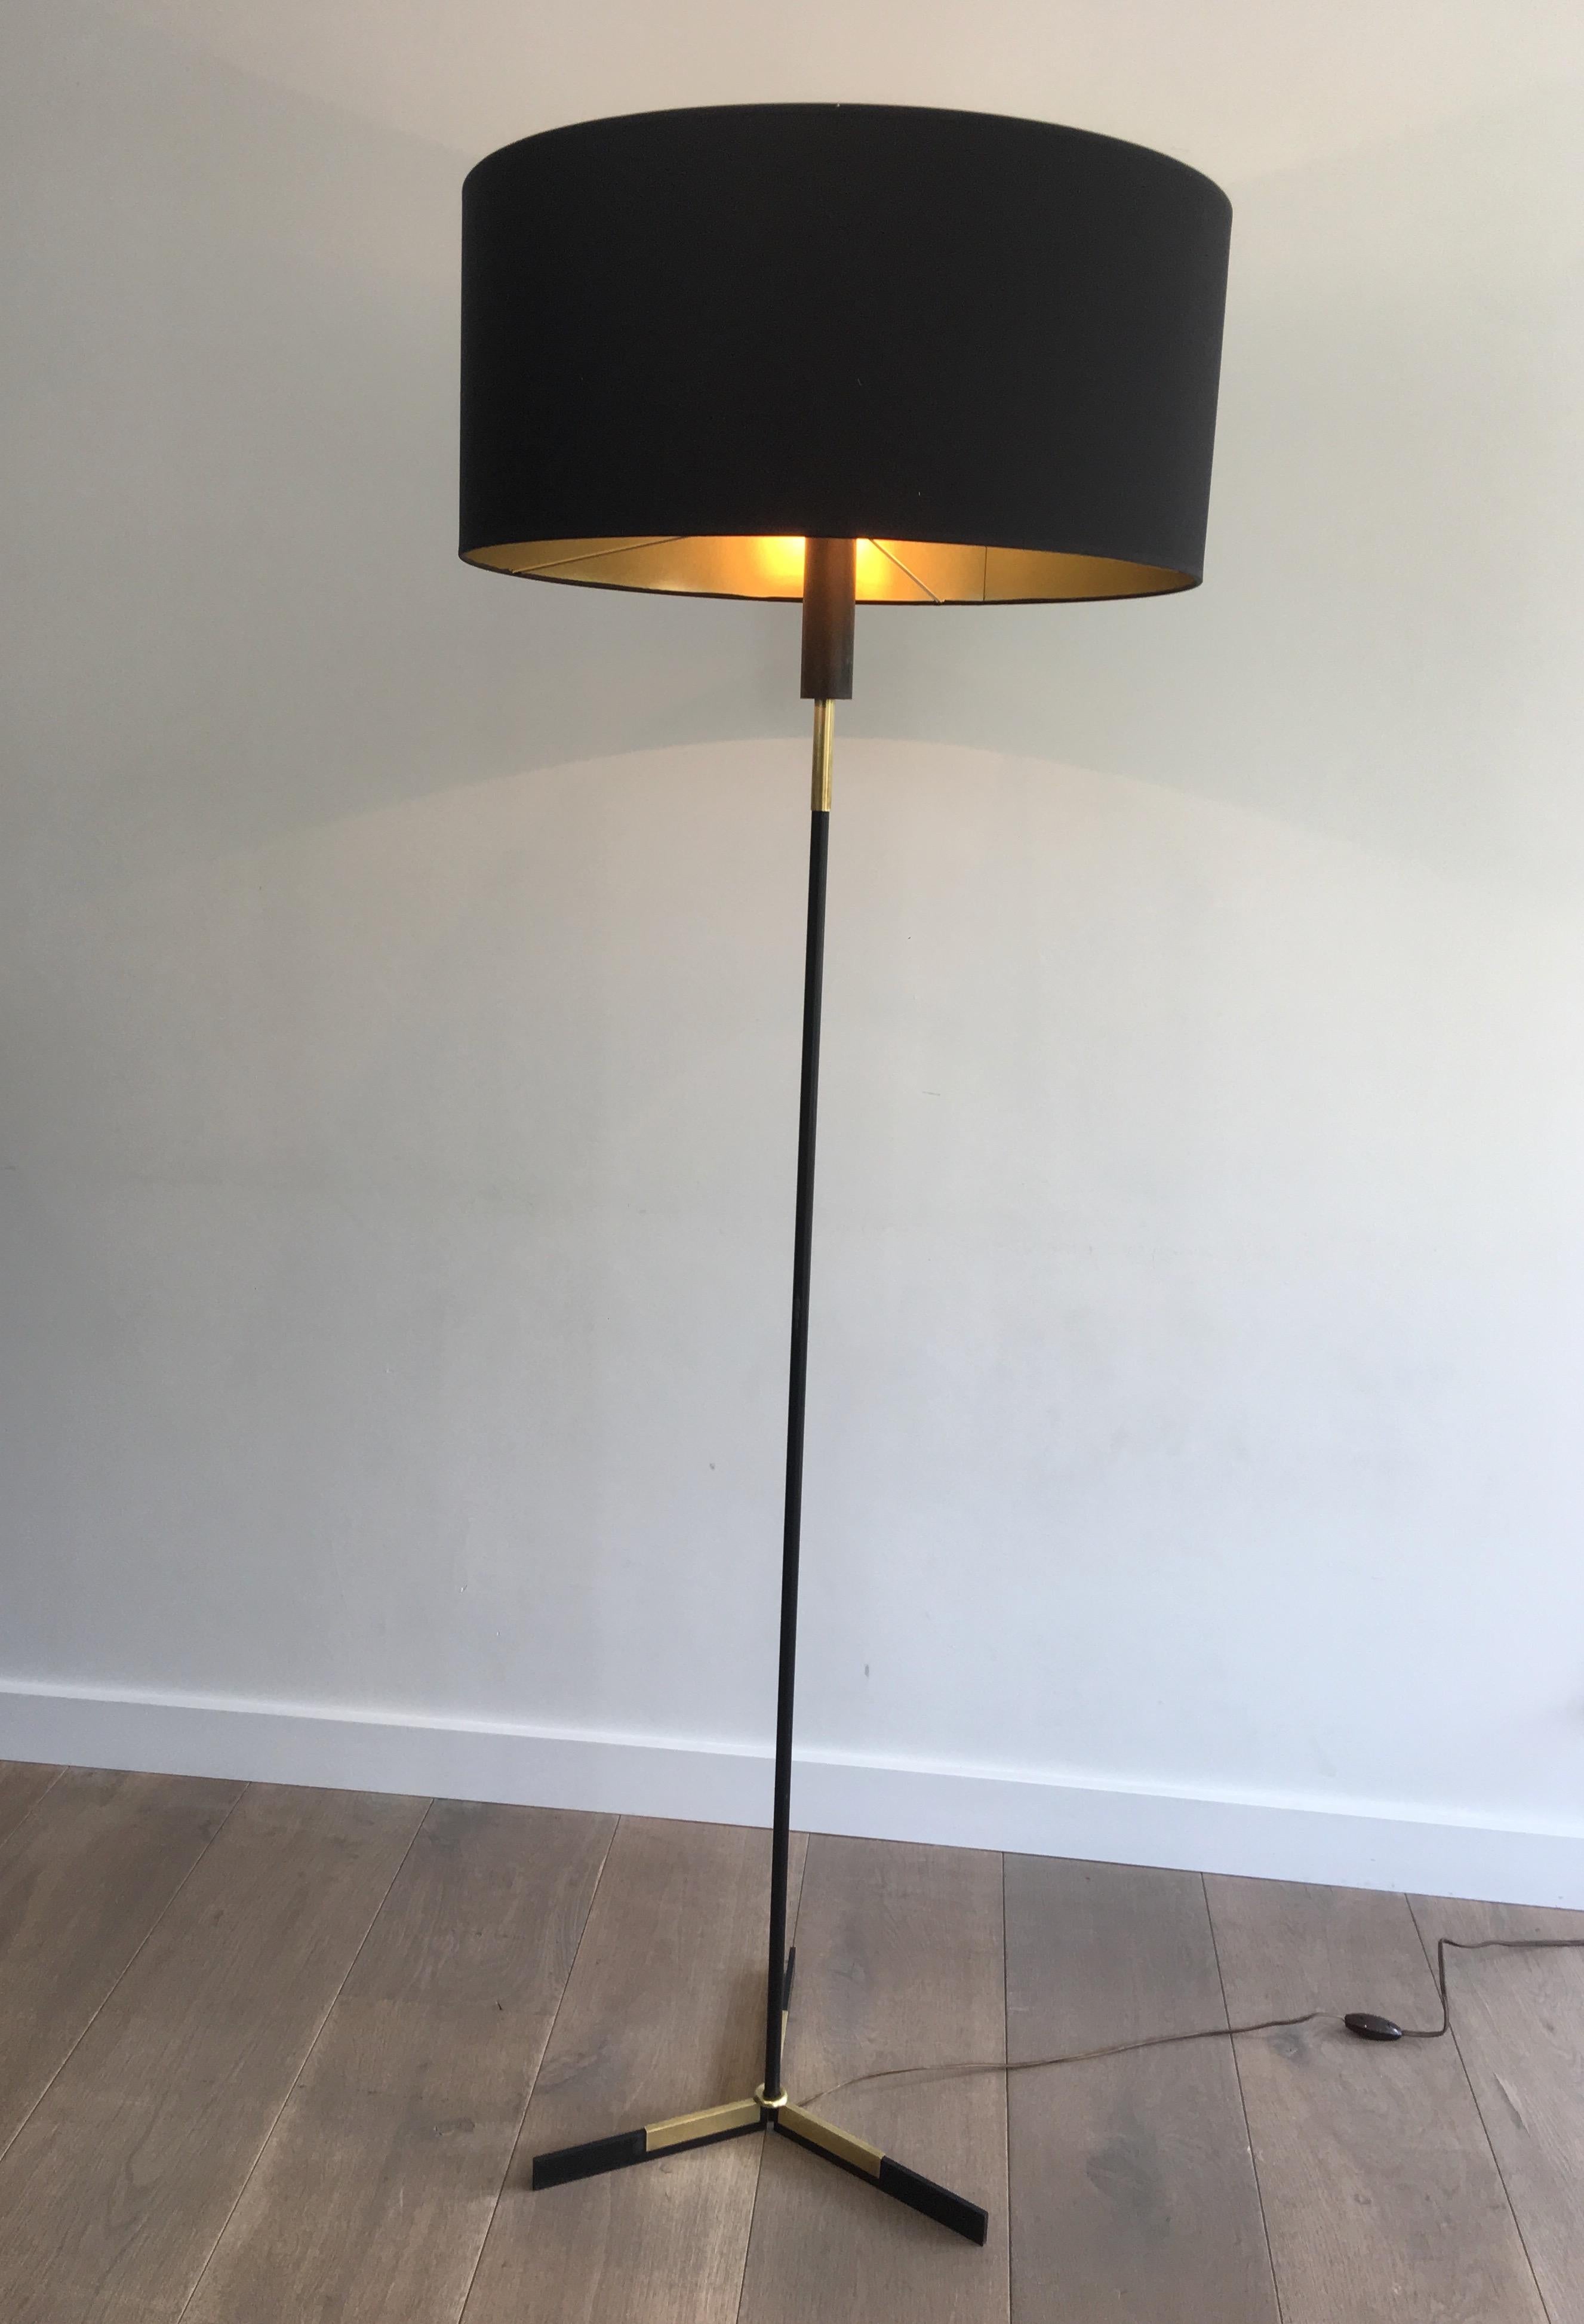 Black Lacquered and Brass Design Floor Lamp, French, circa 1950 For Sale 8